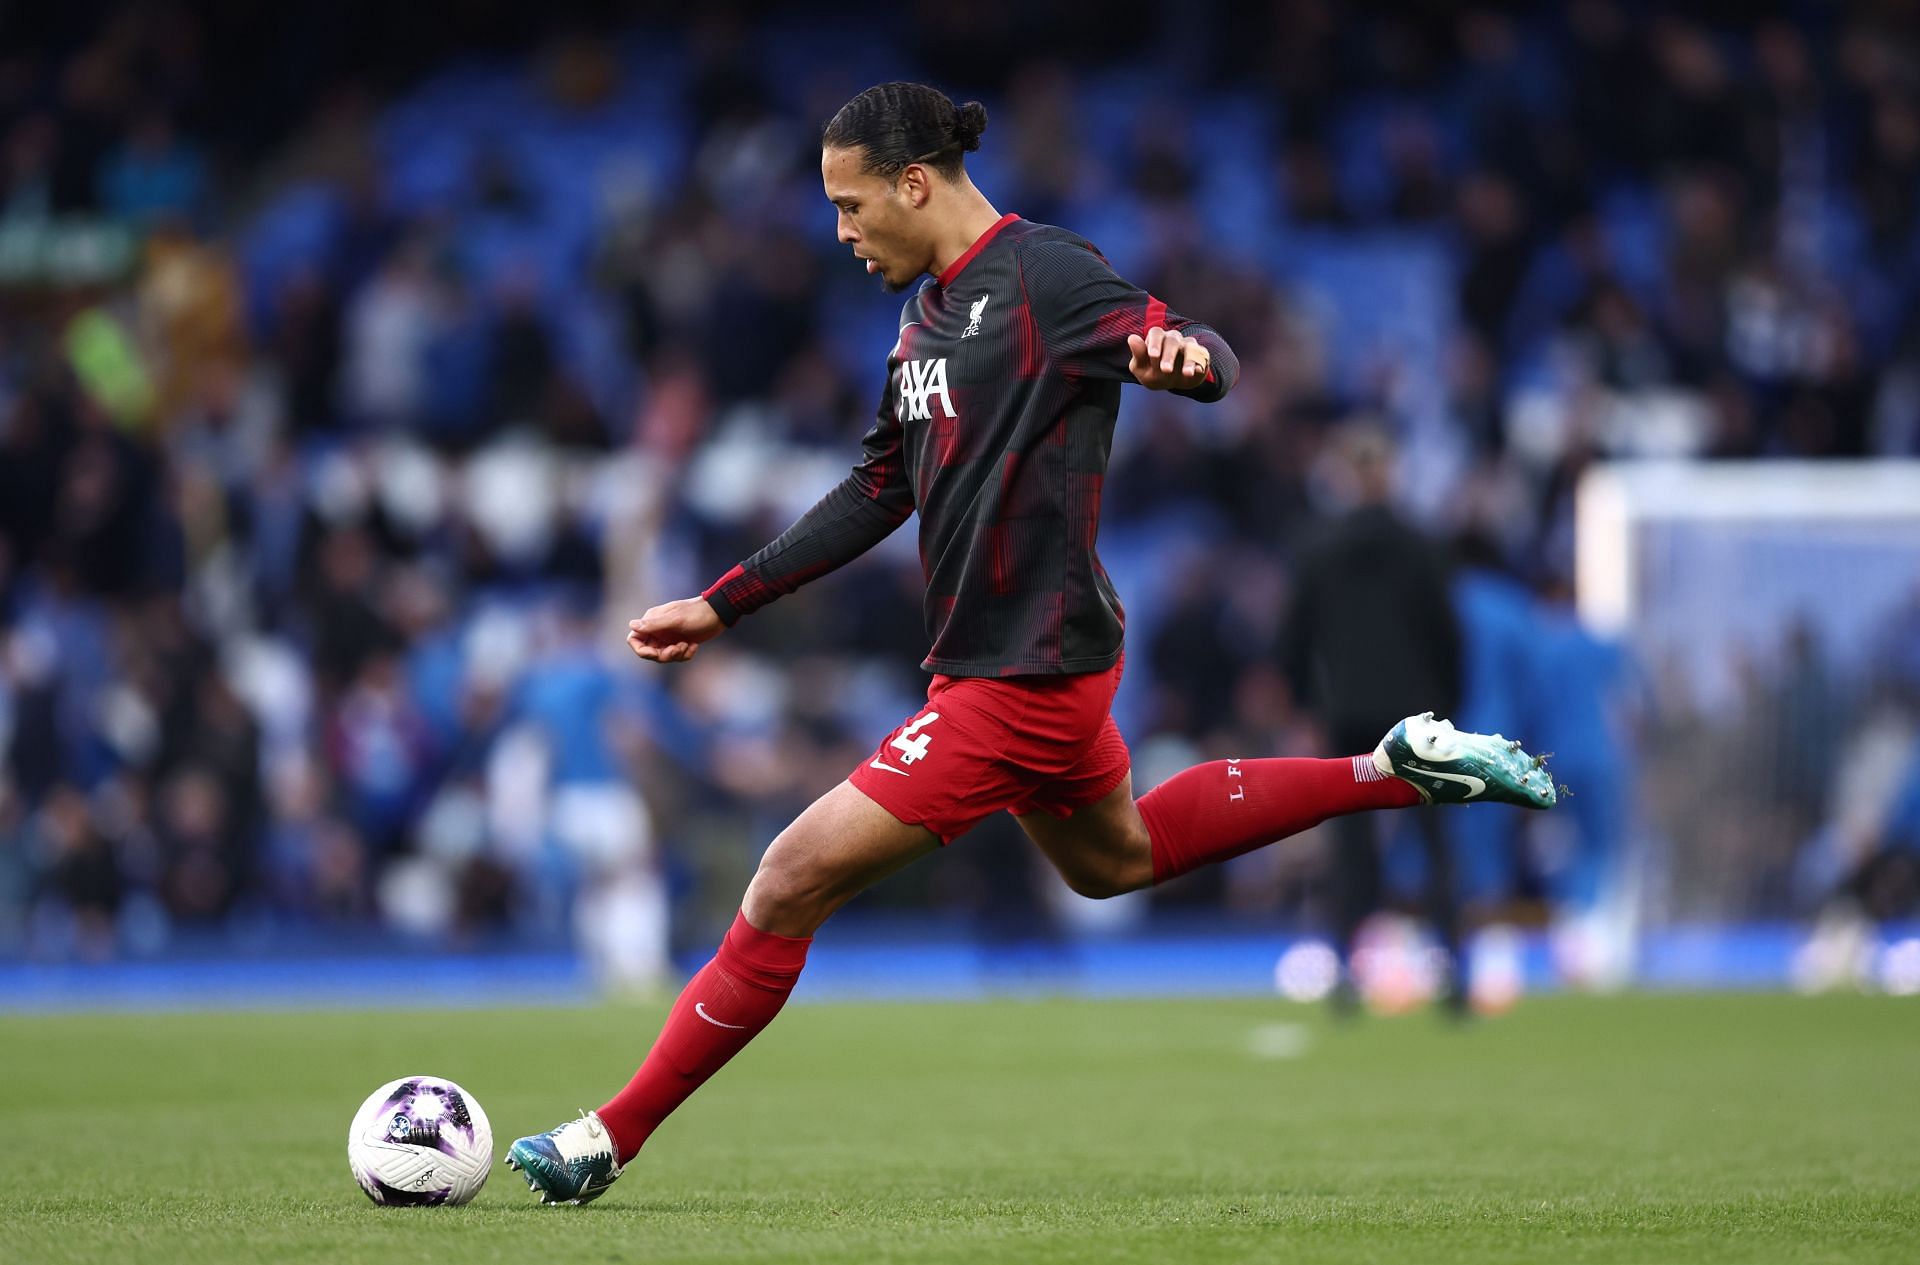 Virgil van Dijk has been pivotal for the Reds this season, stabilizing their defense and building from the back